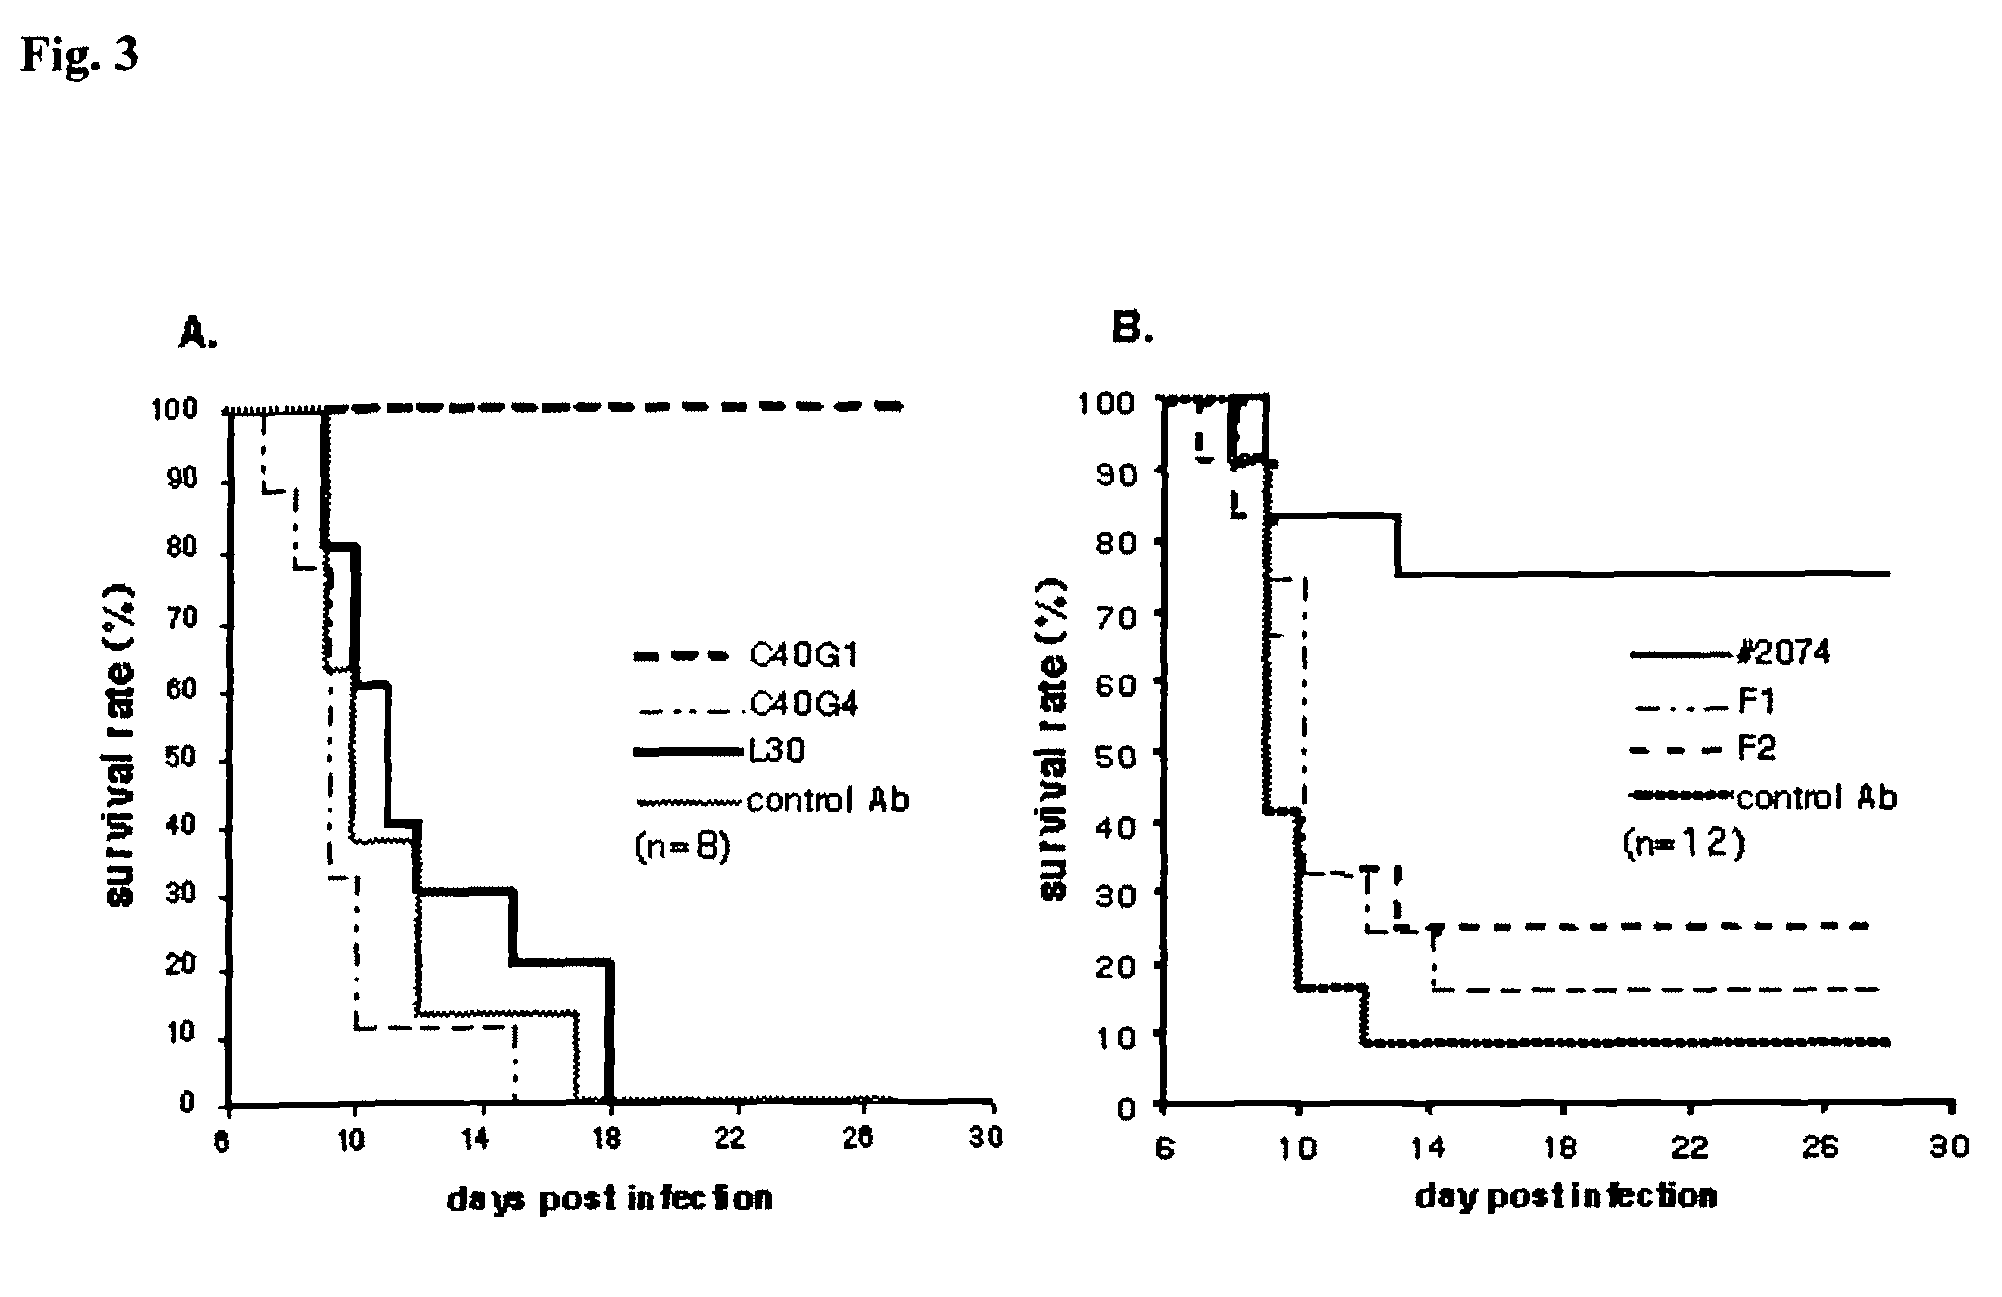 Human monoclonal antibodies to influenza M2 protein and methods of making and using same